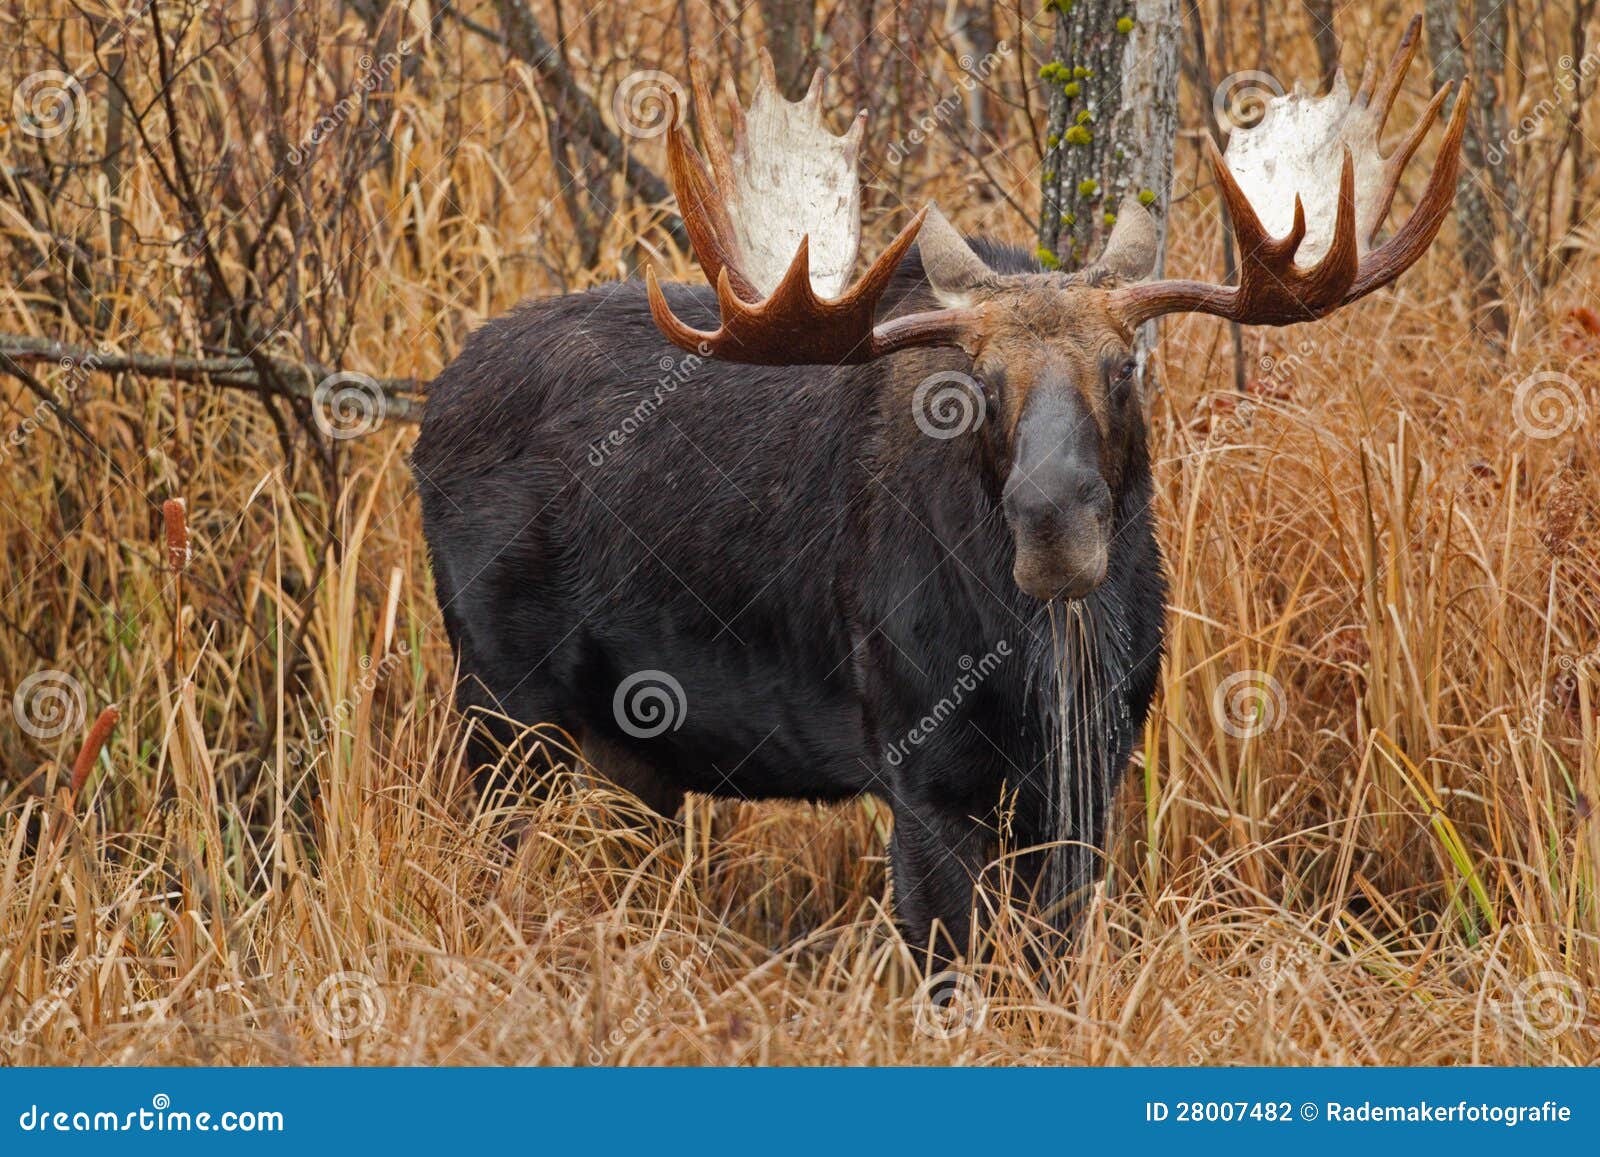 male moose drooling in a swampy area